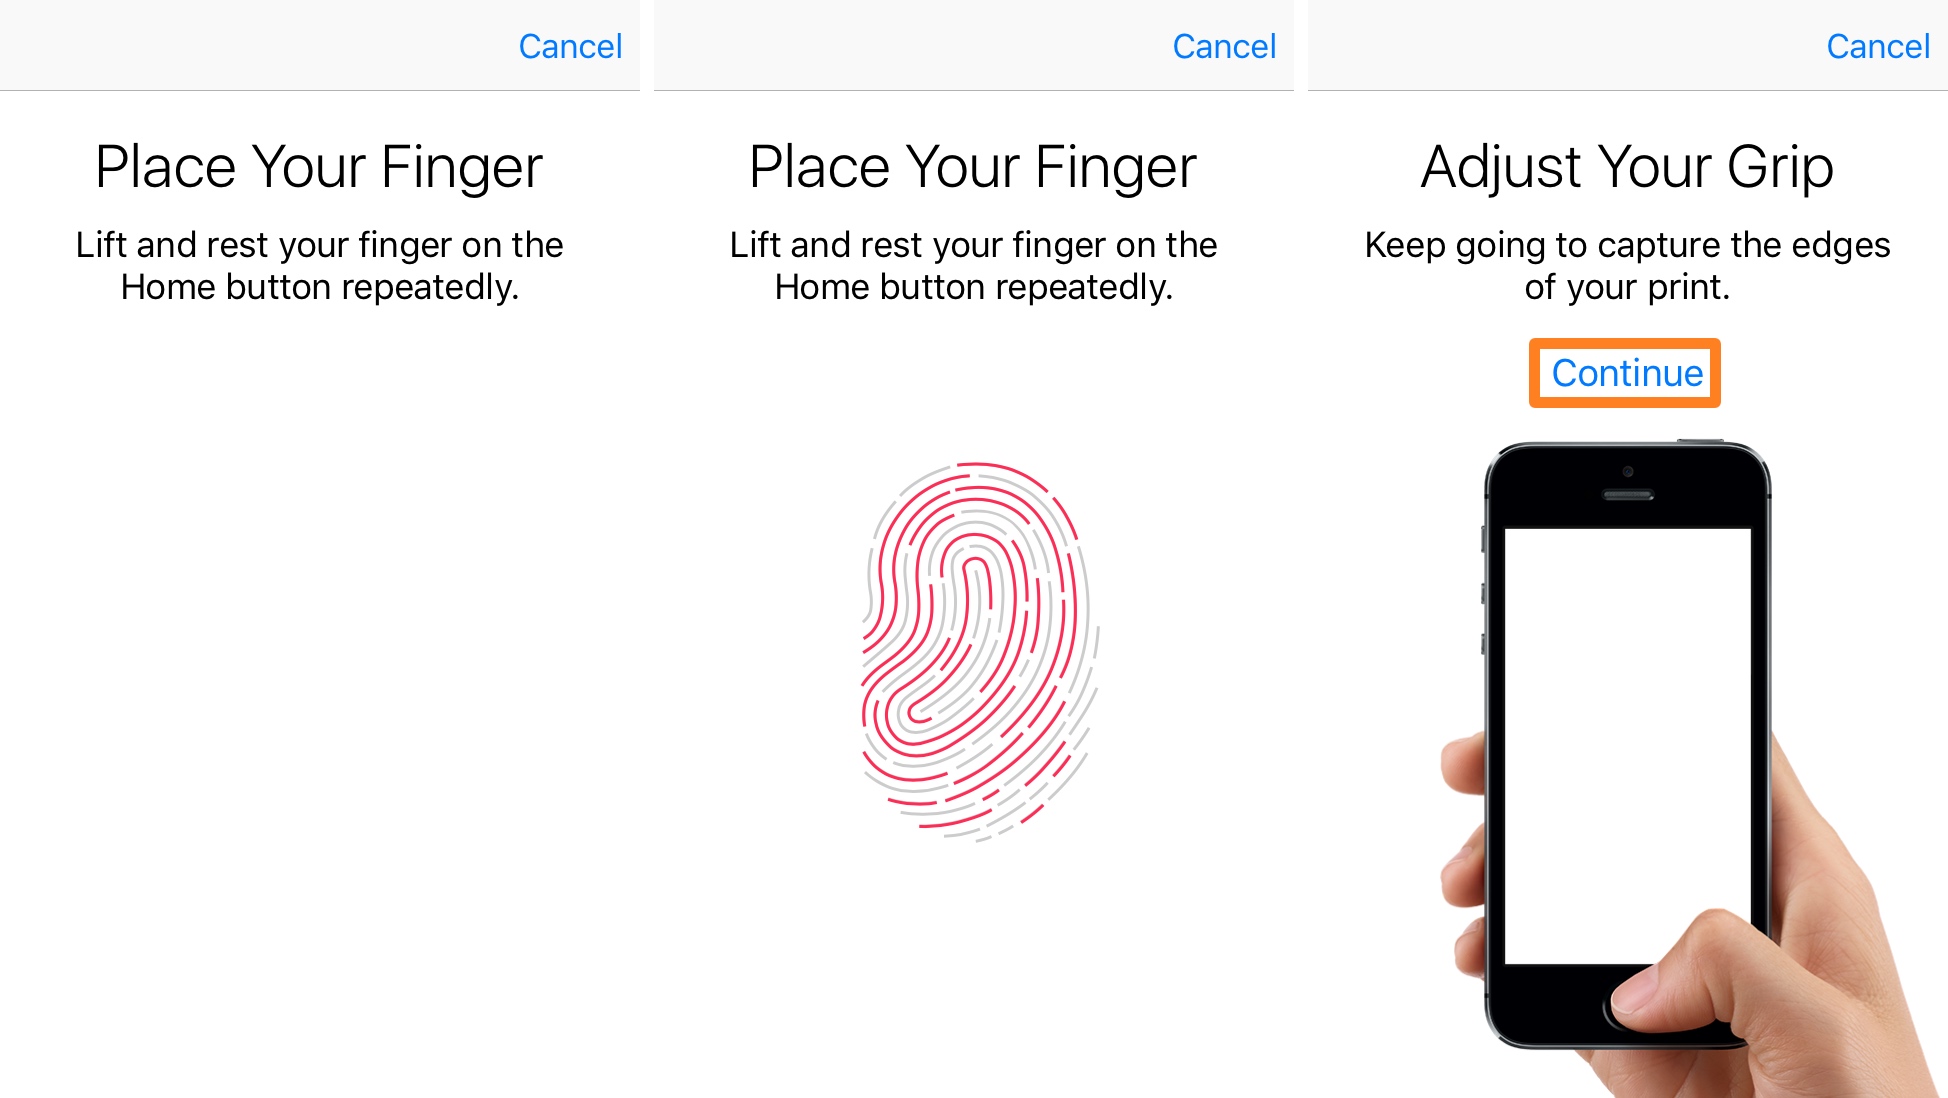 How to Add More Fingerprints to Your iPhone or iPad Touch ID Sensor?